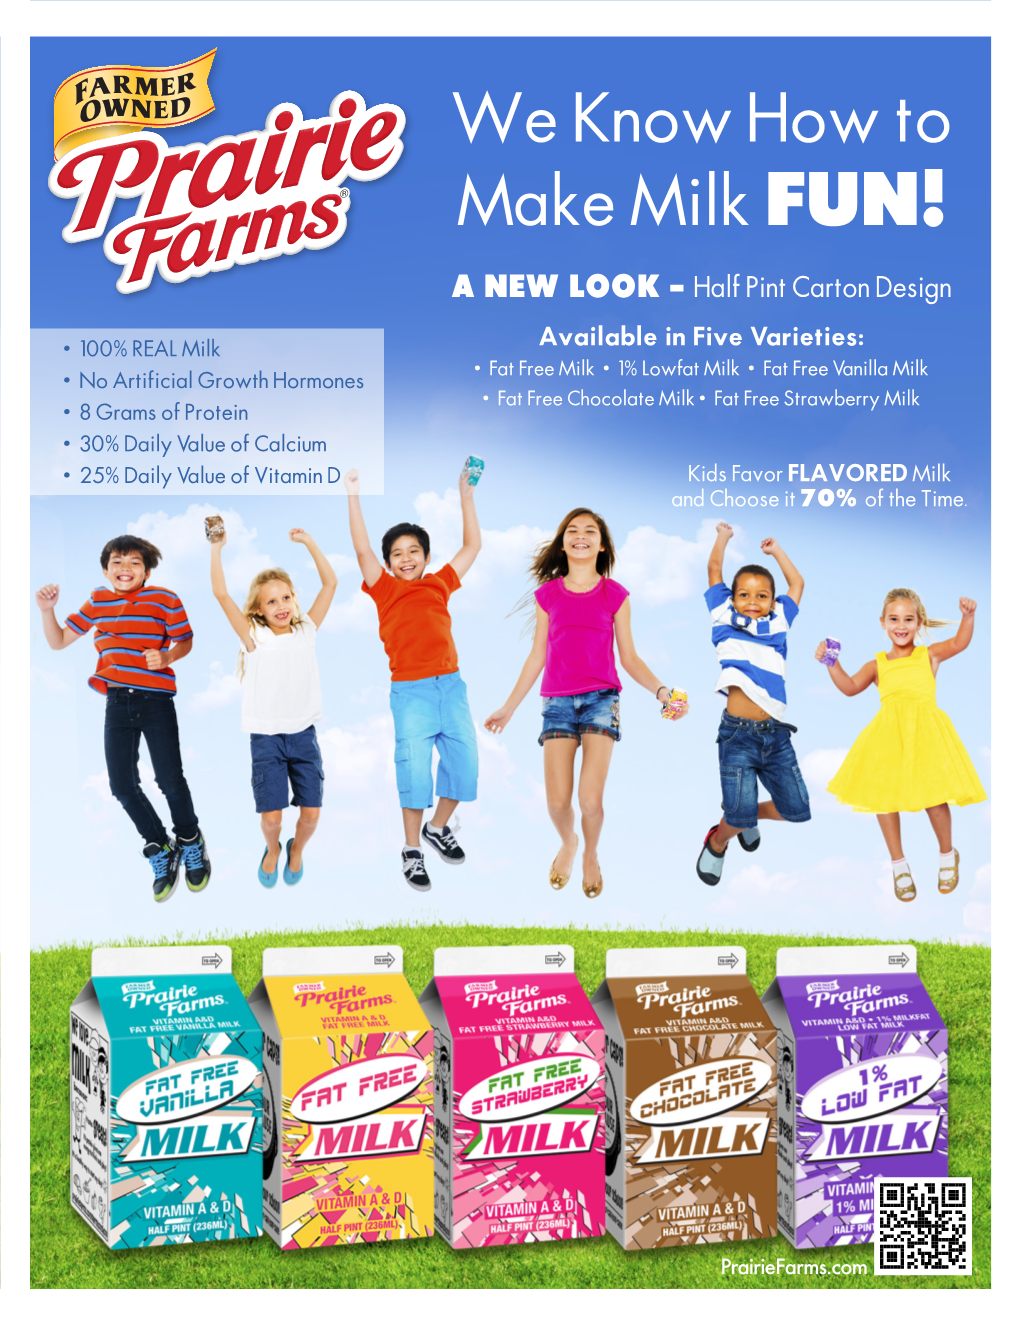 We Know How to Make Milk FUN!